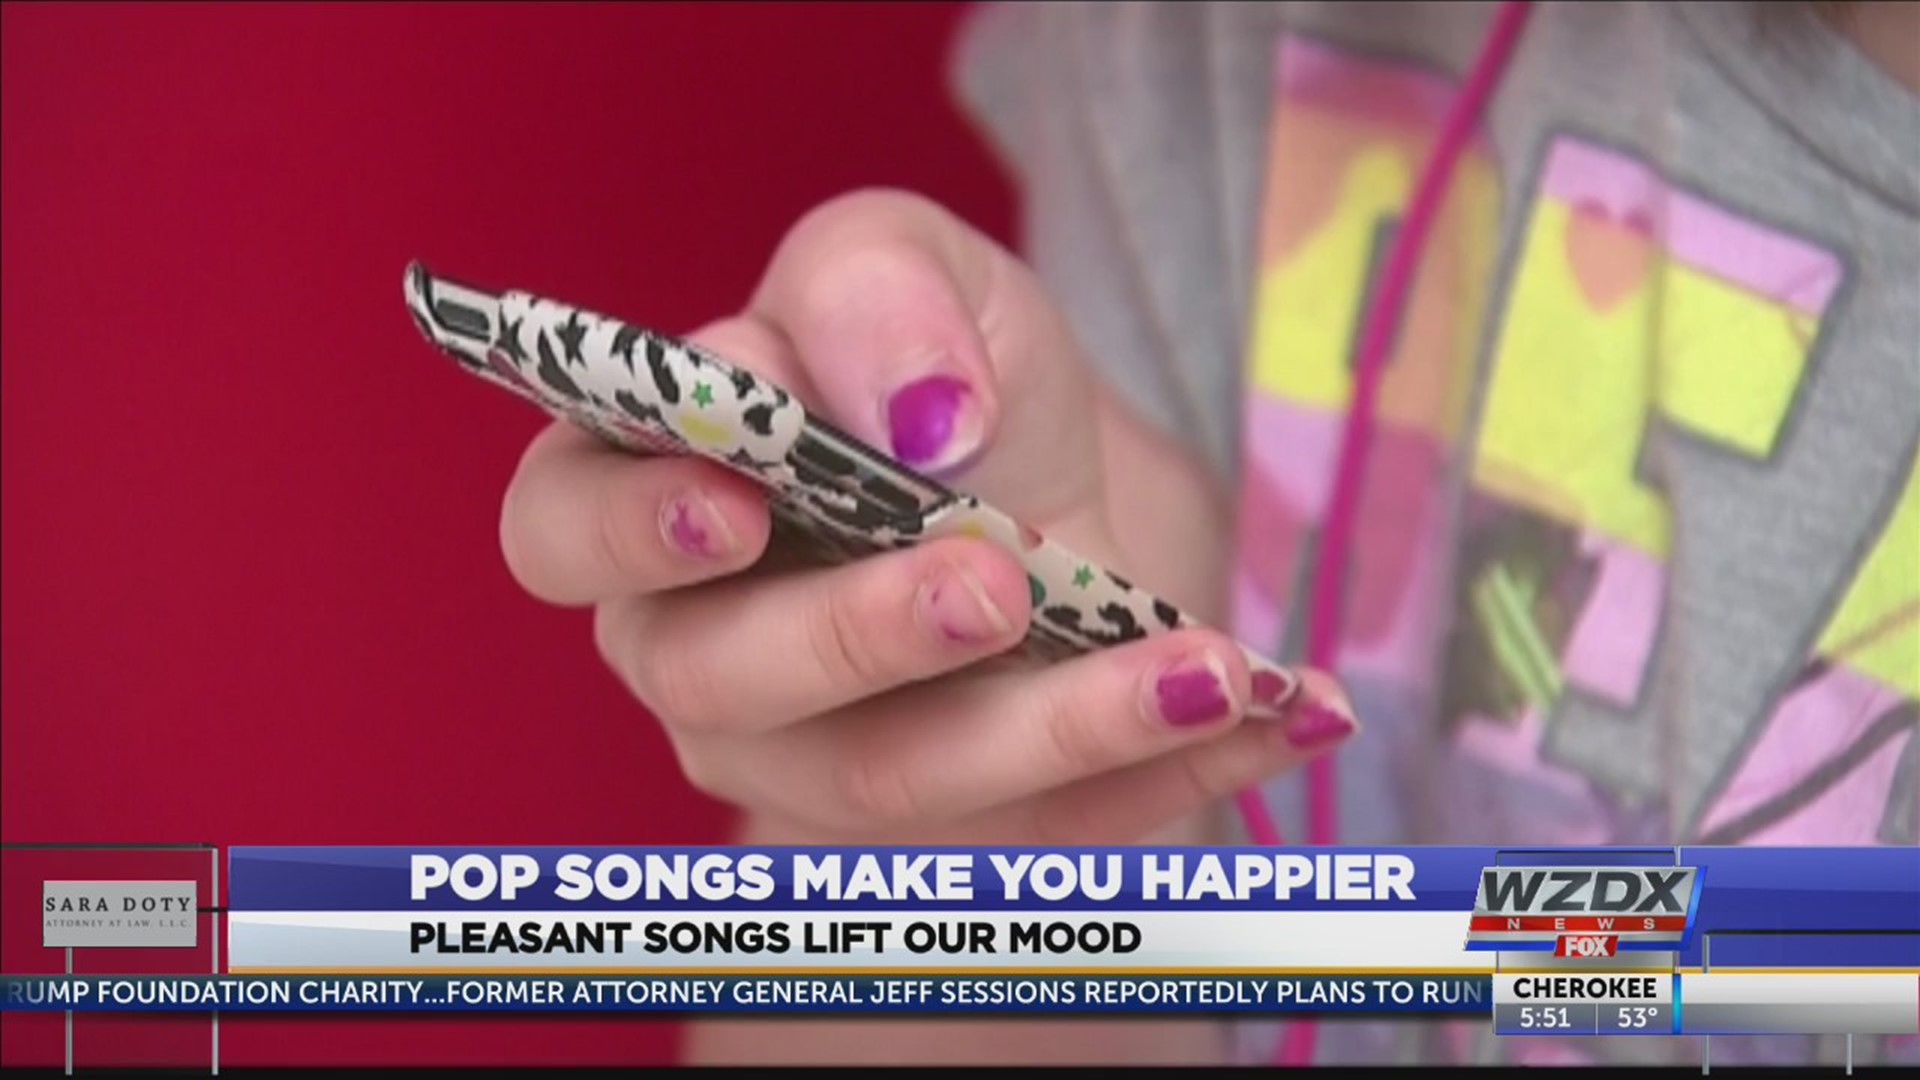 A new study shows that pop music can make you happier.